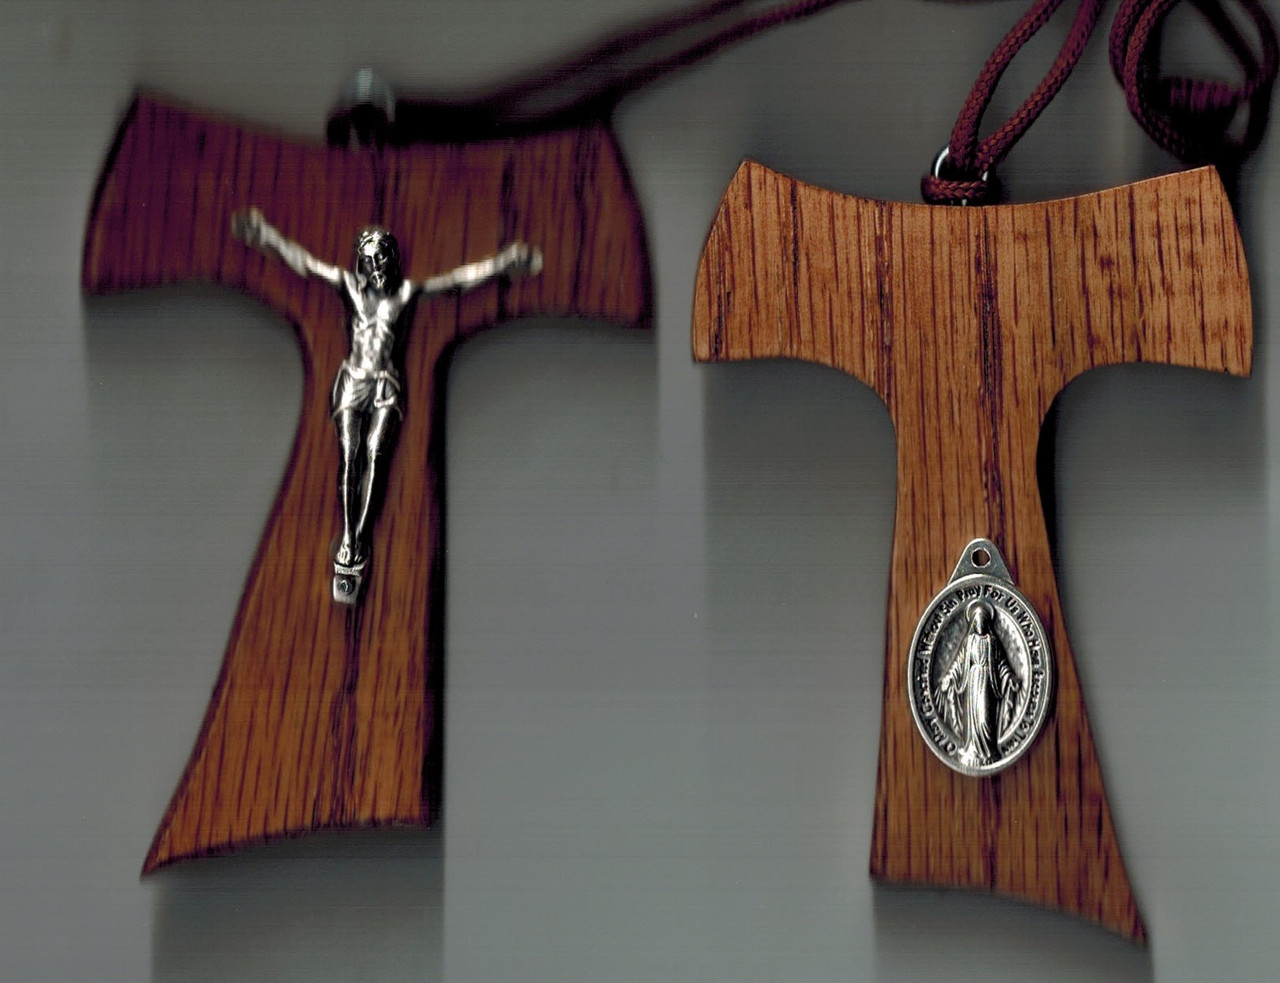 Hand crafted wooden tau pendant with corpus and Miraculous Medal